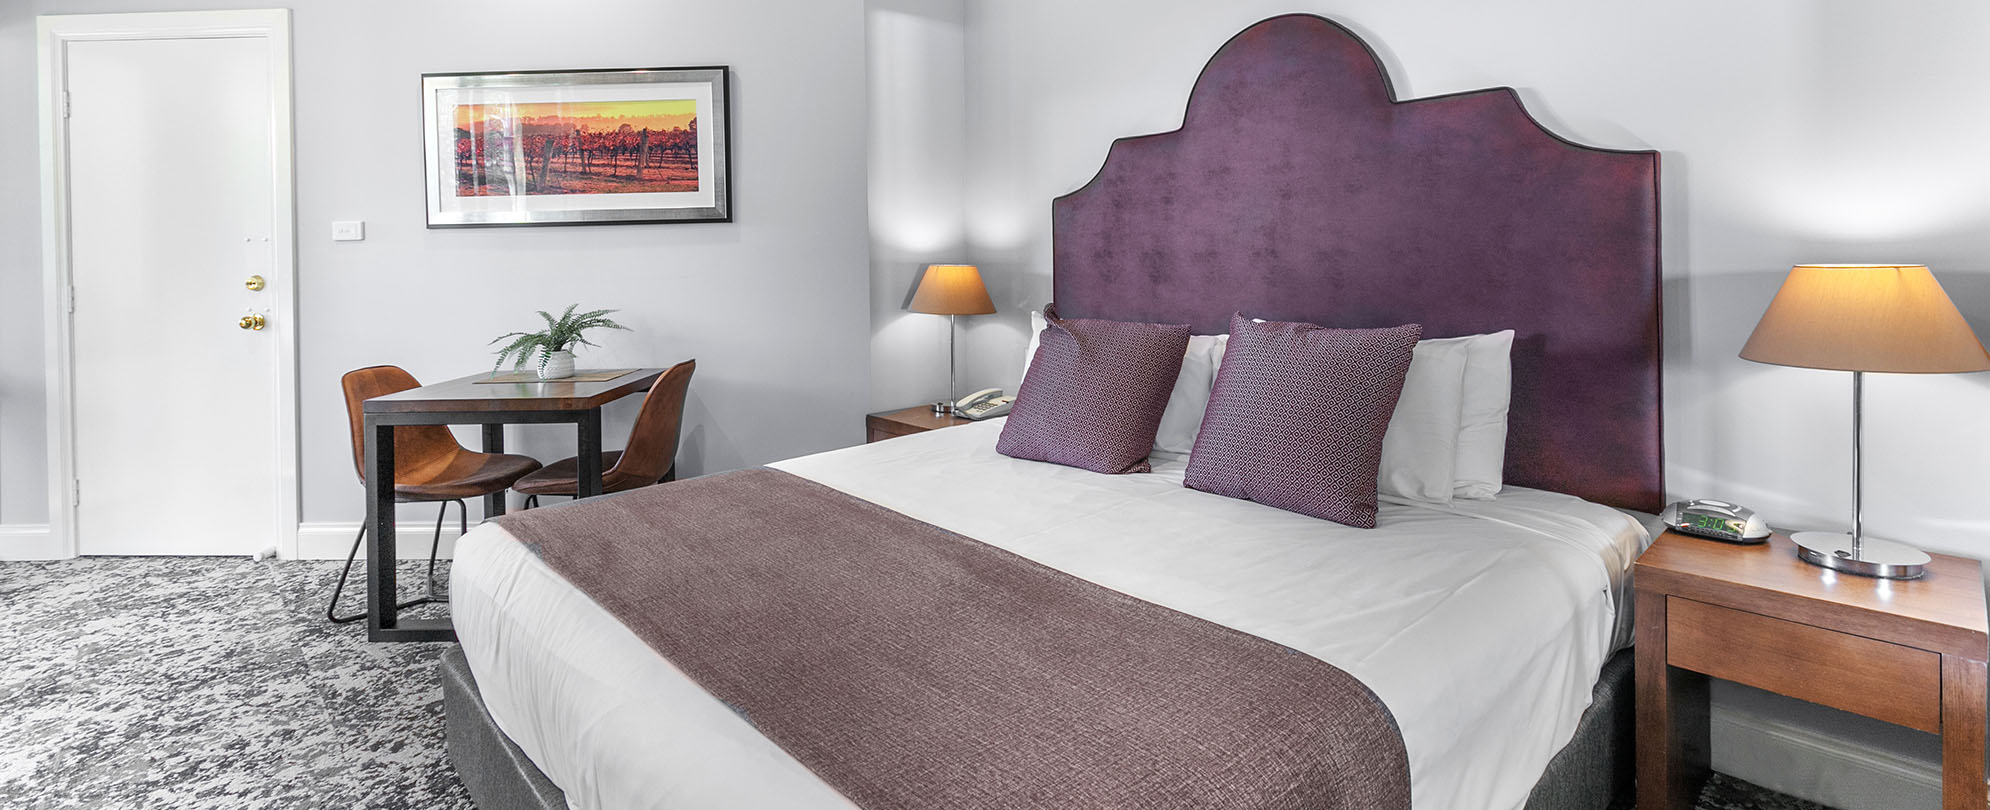 A bed with a headboard, two side tables with lamps, and a small dining table Club Wyndham Pokolbin Hill studio suite.